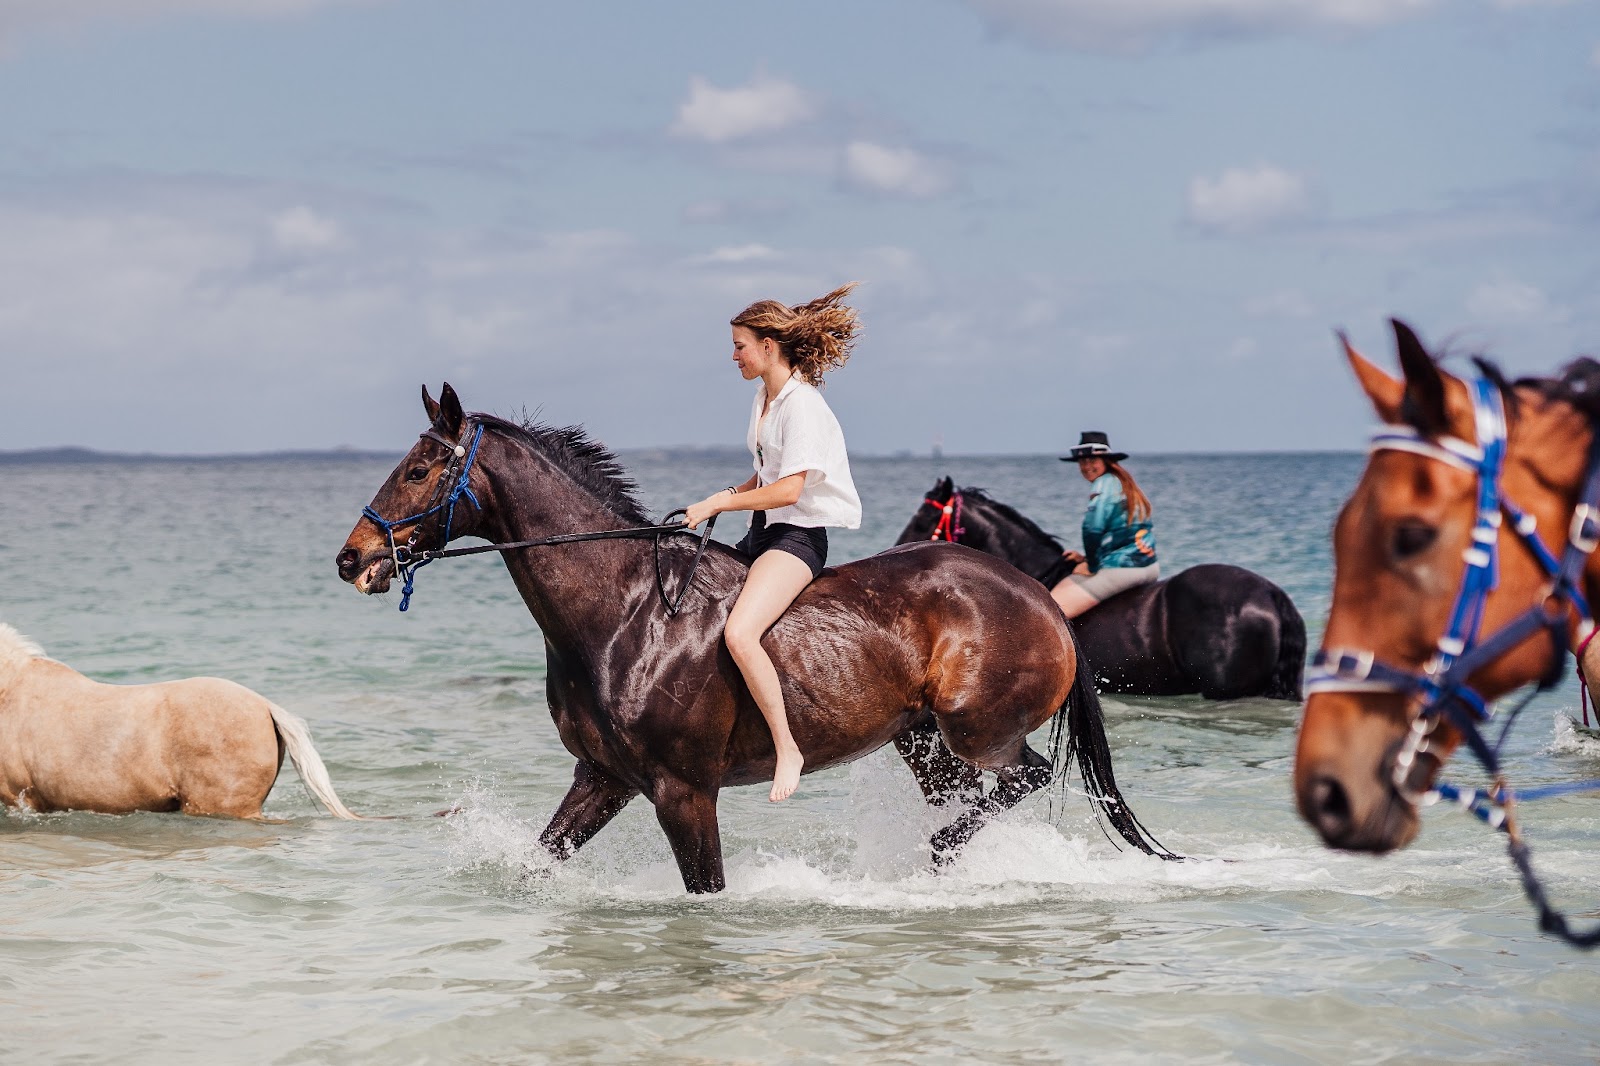 An enchanting image of a people riding through the water with thoroughbred horses at a Jamaican resort. Experience the magic of sharing the water with these majestic creatures.